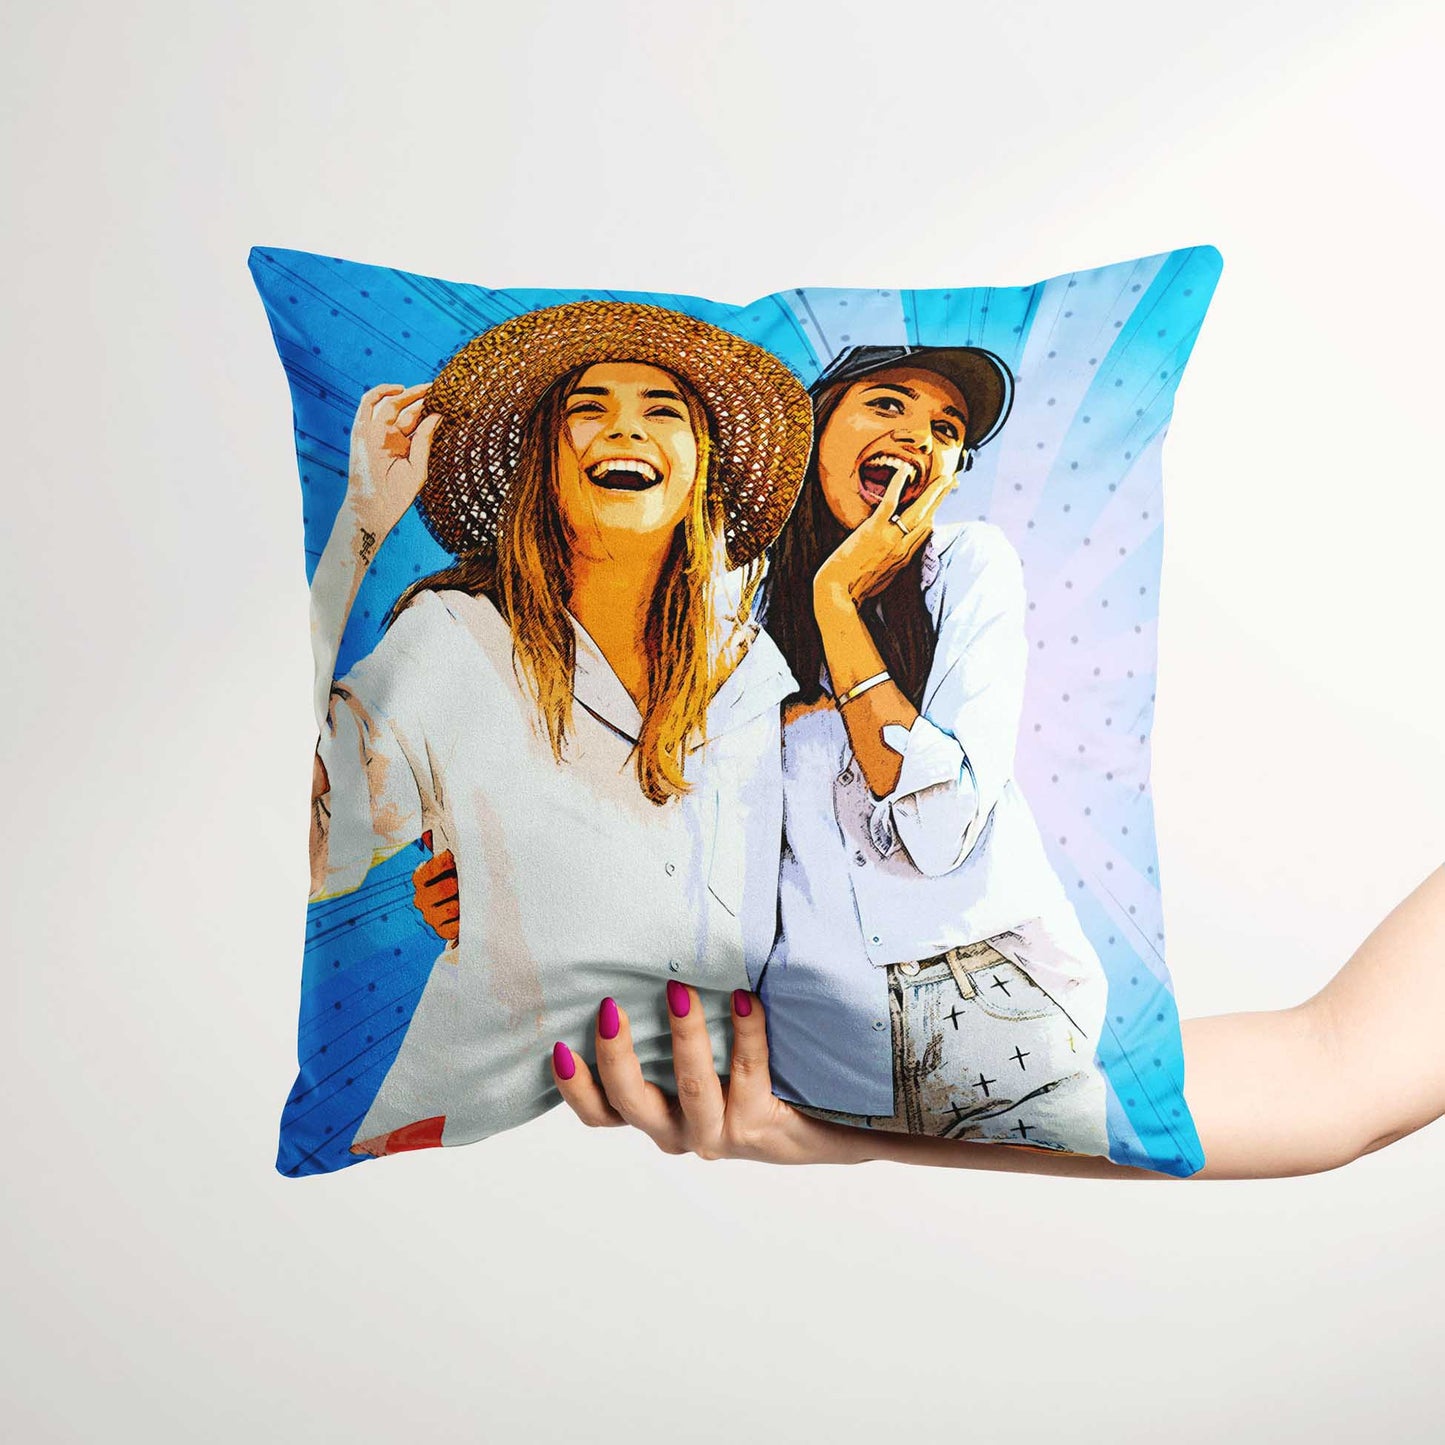 Infuse your living space with retro charm and vibrant energy using the Personalised Cartoon Comics Cushion. Its cozy and comfortable fabric provides a welcoming touch, while the vivid and colorful cartoon design adds an invigorating vibe 